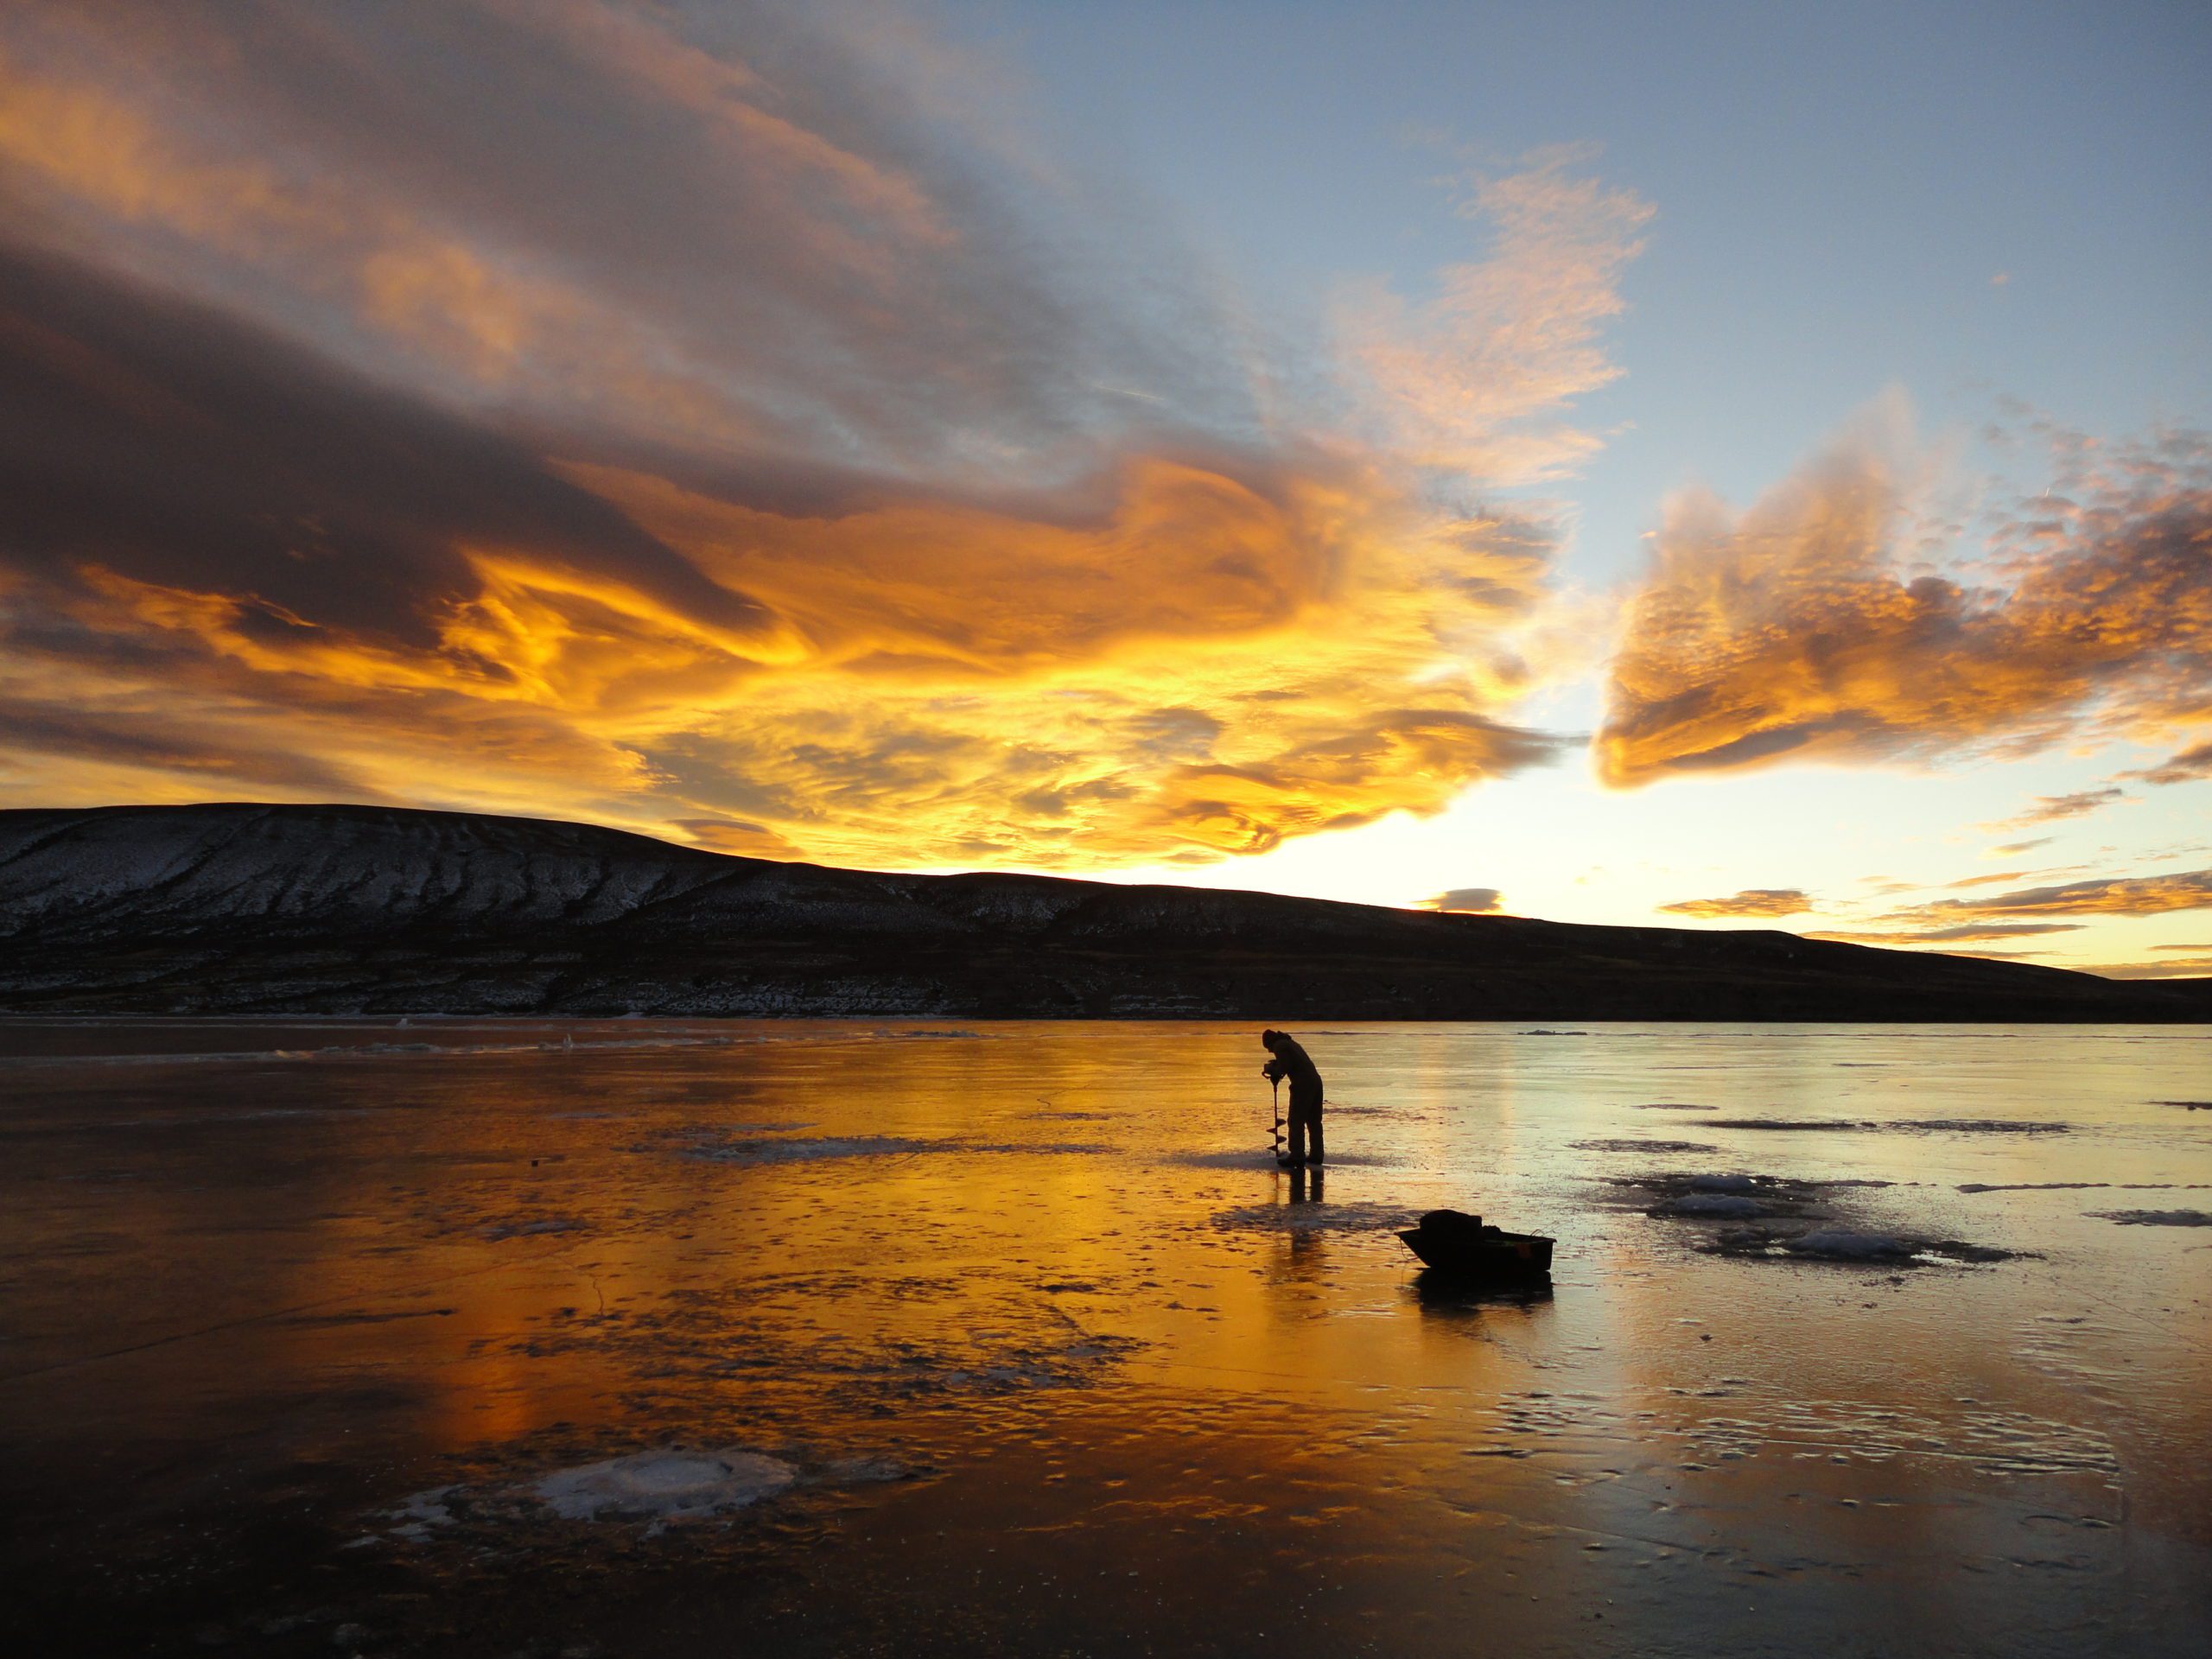 Wyoming Game and Fish Department - Managing the fishery at Flaming Gorge  Reservoir is a collaborative effort